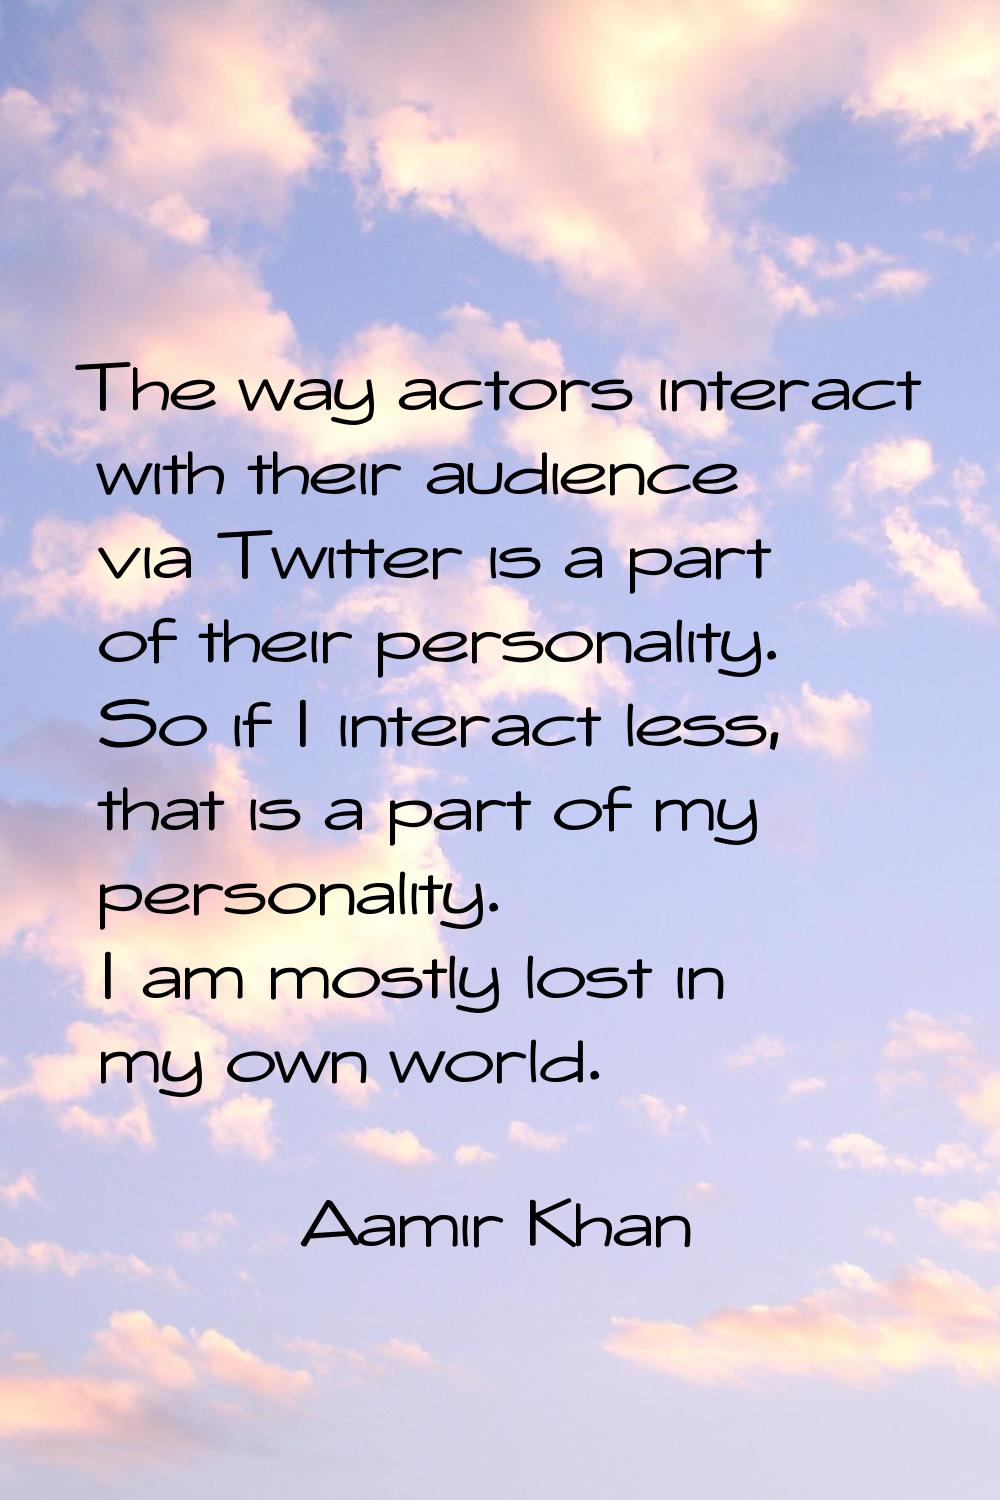 The way actors interact with their audience via Twitter is a part of their personality. So if I int